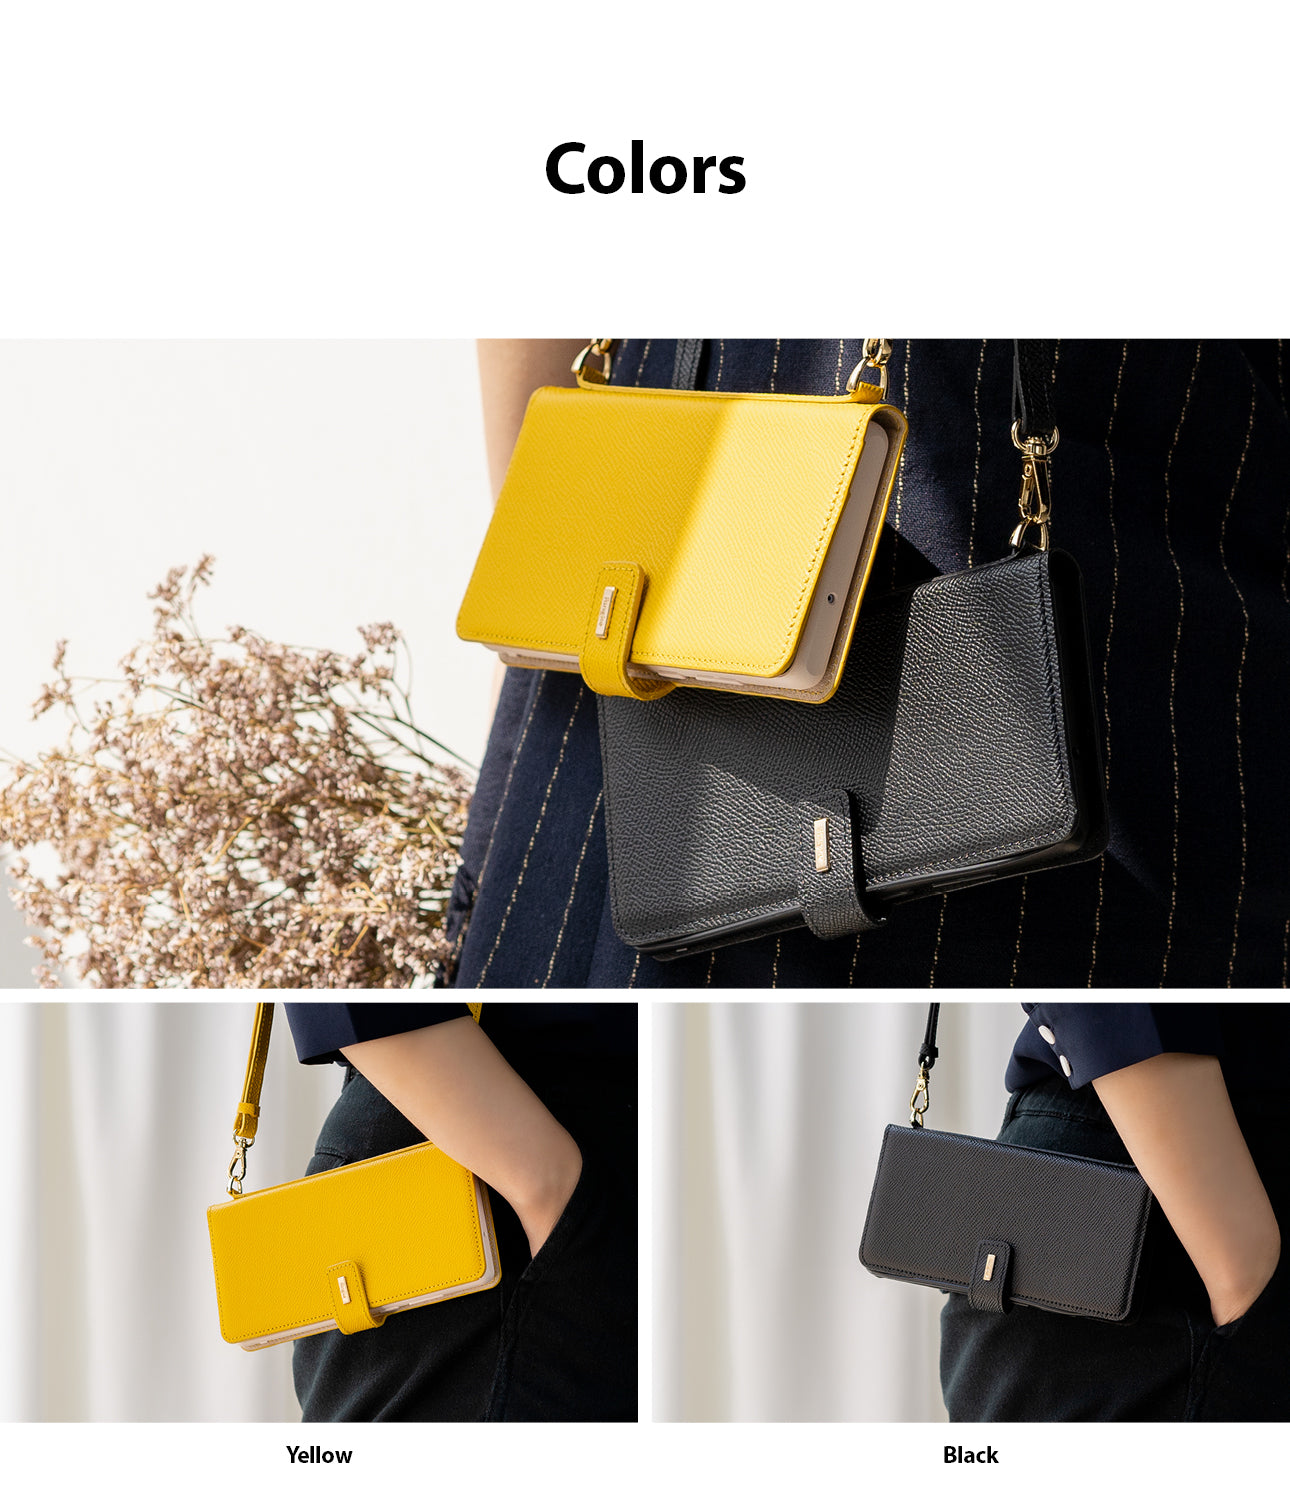 choose your style - these classic and chic colors are perfect for any outfit and occasion